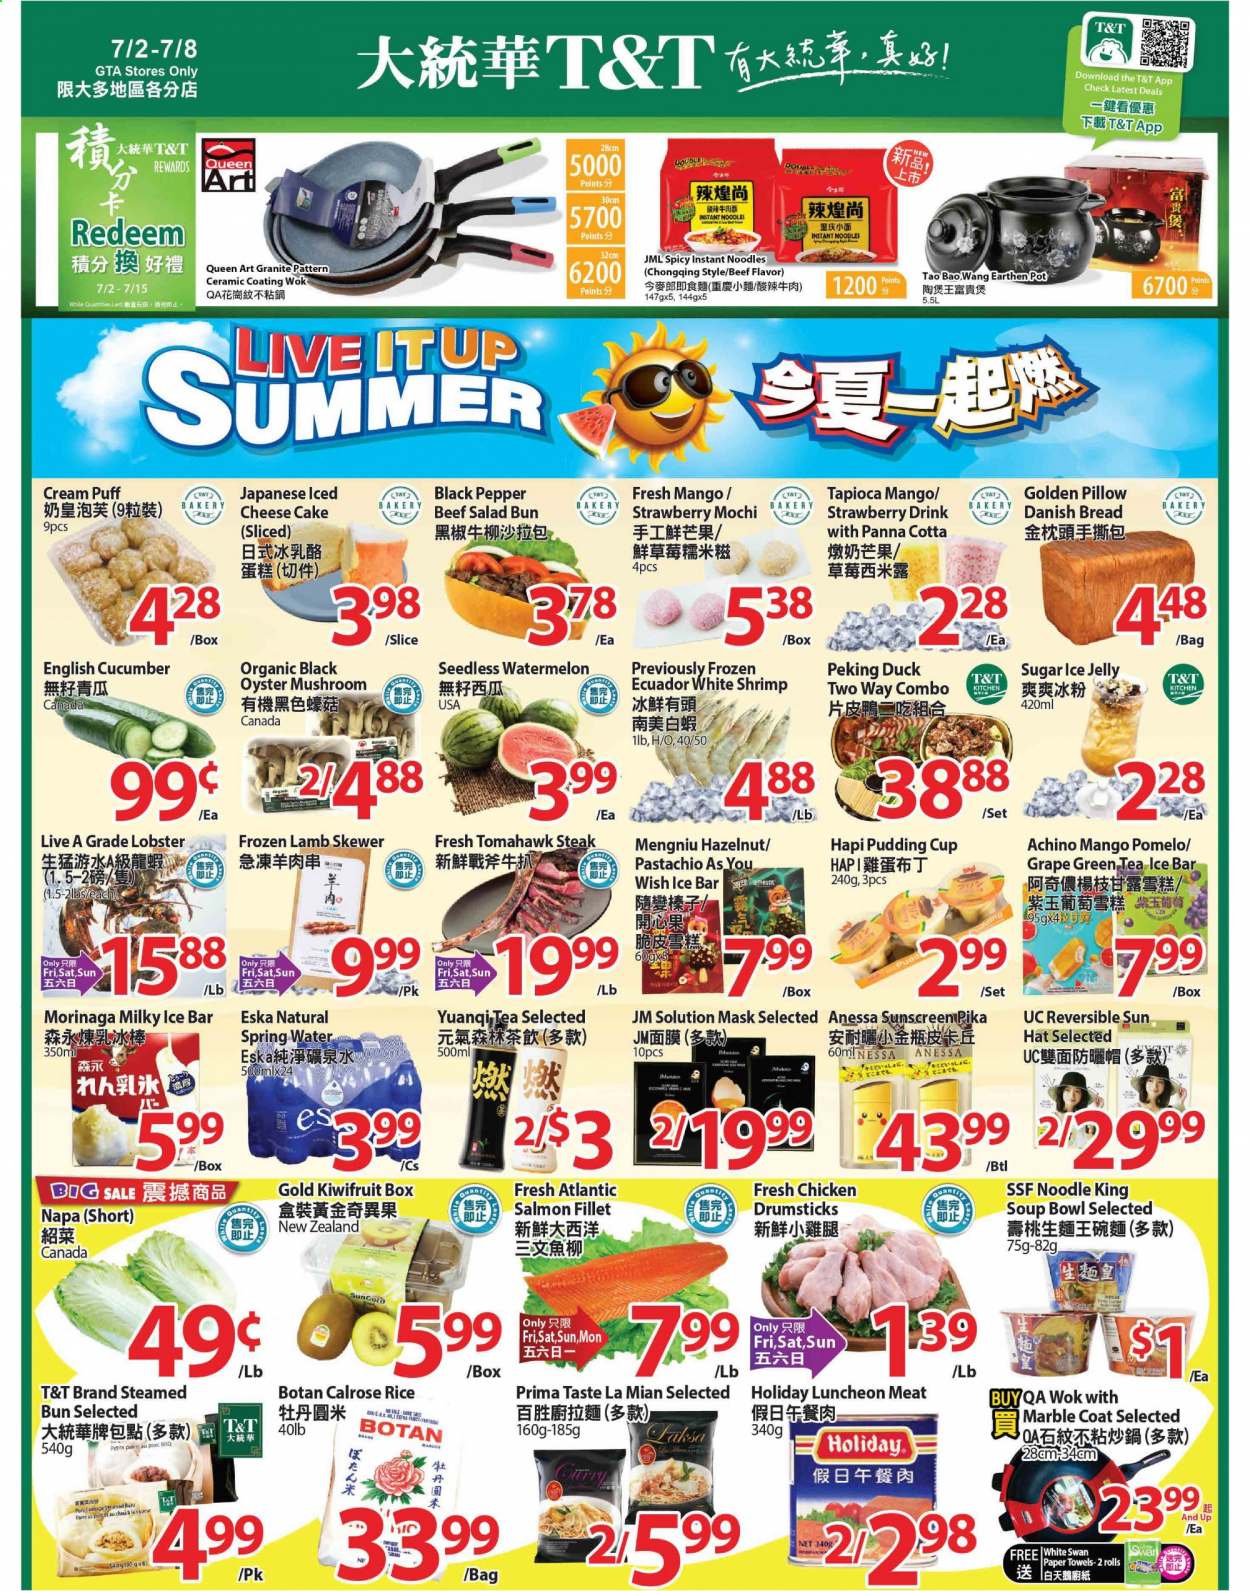 thumbnail - T&T Supermarket Flyer - July 02, 2021 - July 08, 2021 - Sales products - oyster mushrooms, mushrooms, bread, cake, buns, cheesecake, cream puffs, salad, watermelon, pomelo, lobster, salmon, salmon fillet, oysters, shrimps, steamed bun, instant noodles, noodles, lunch meat, cheese, pudding, jelly, sugar, rice, black pepper, spring water, green tea, tea, chicken drumsticks, chicken, beef meat, tomahawk steak, kitchen towels, paper towels, bag, pot, wok, cup, serving bowl, bowl, pin, pillow, kiwi, steak. Page 1.